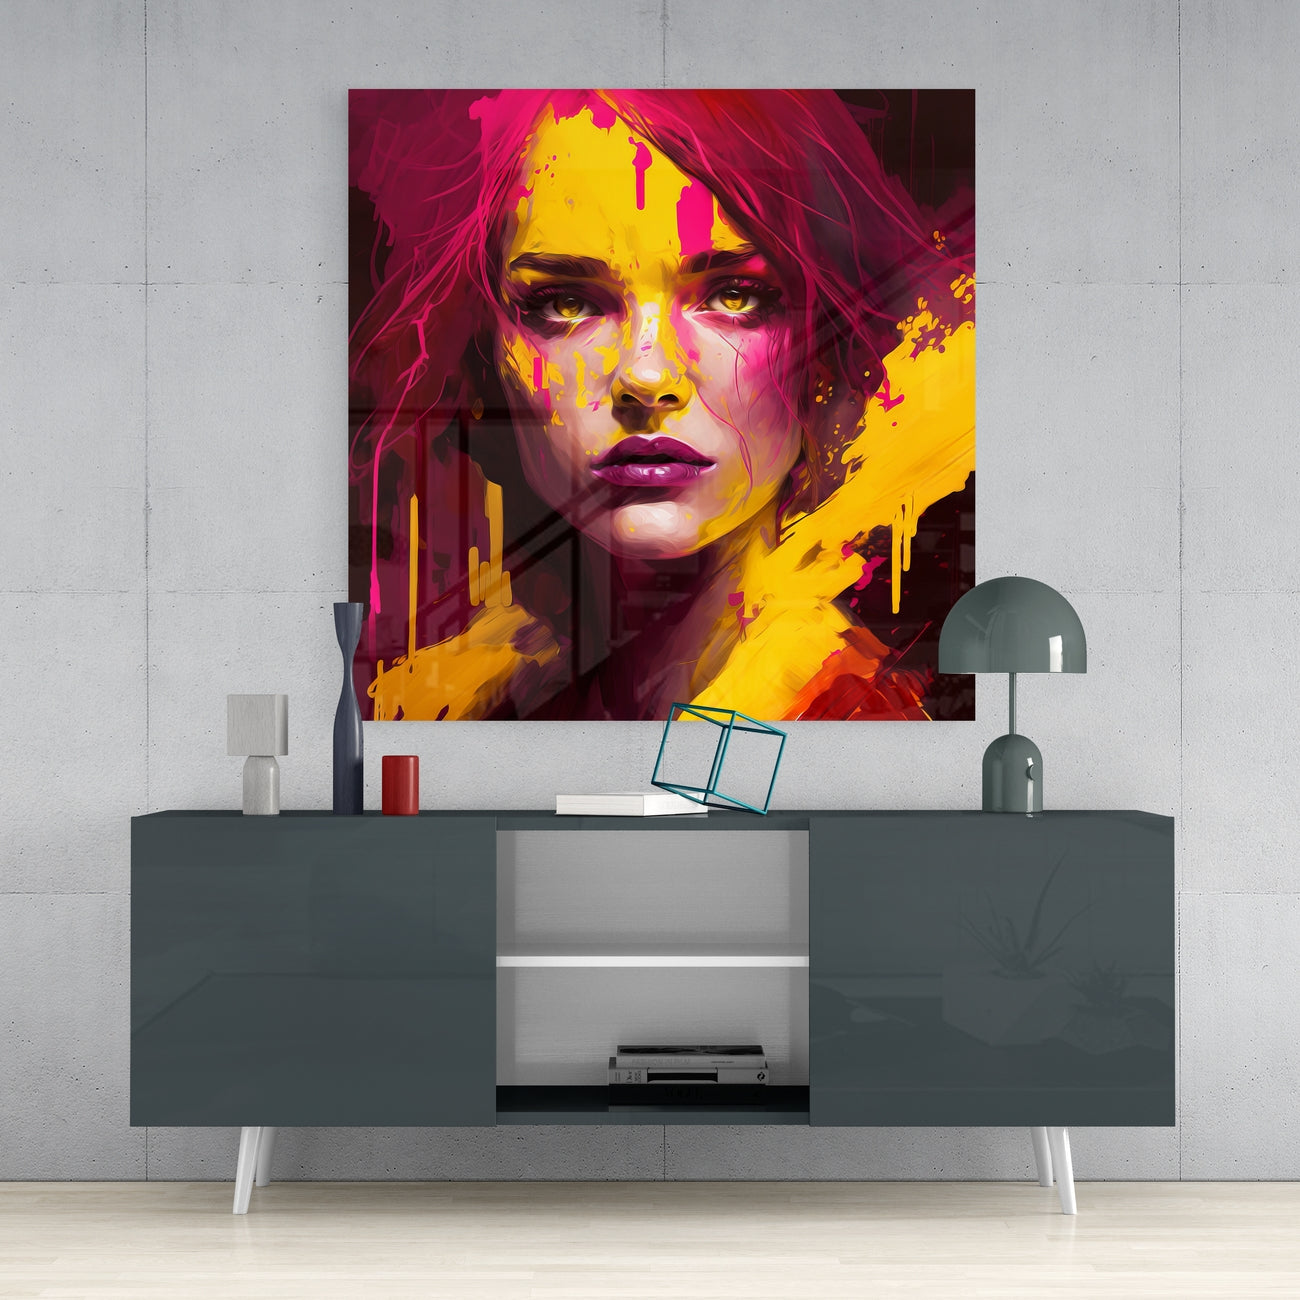 She Glass Wall Art || Designer's Collection